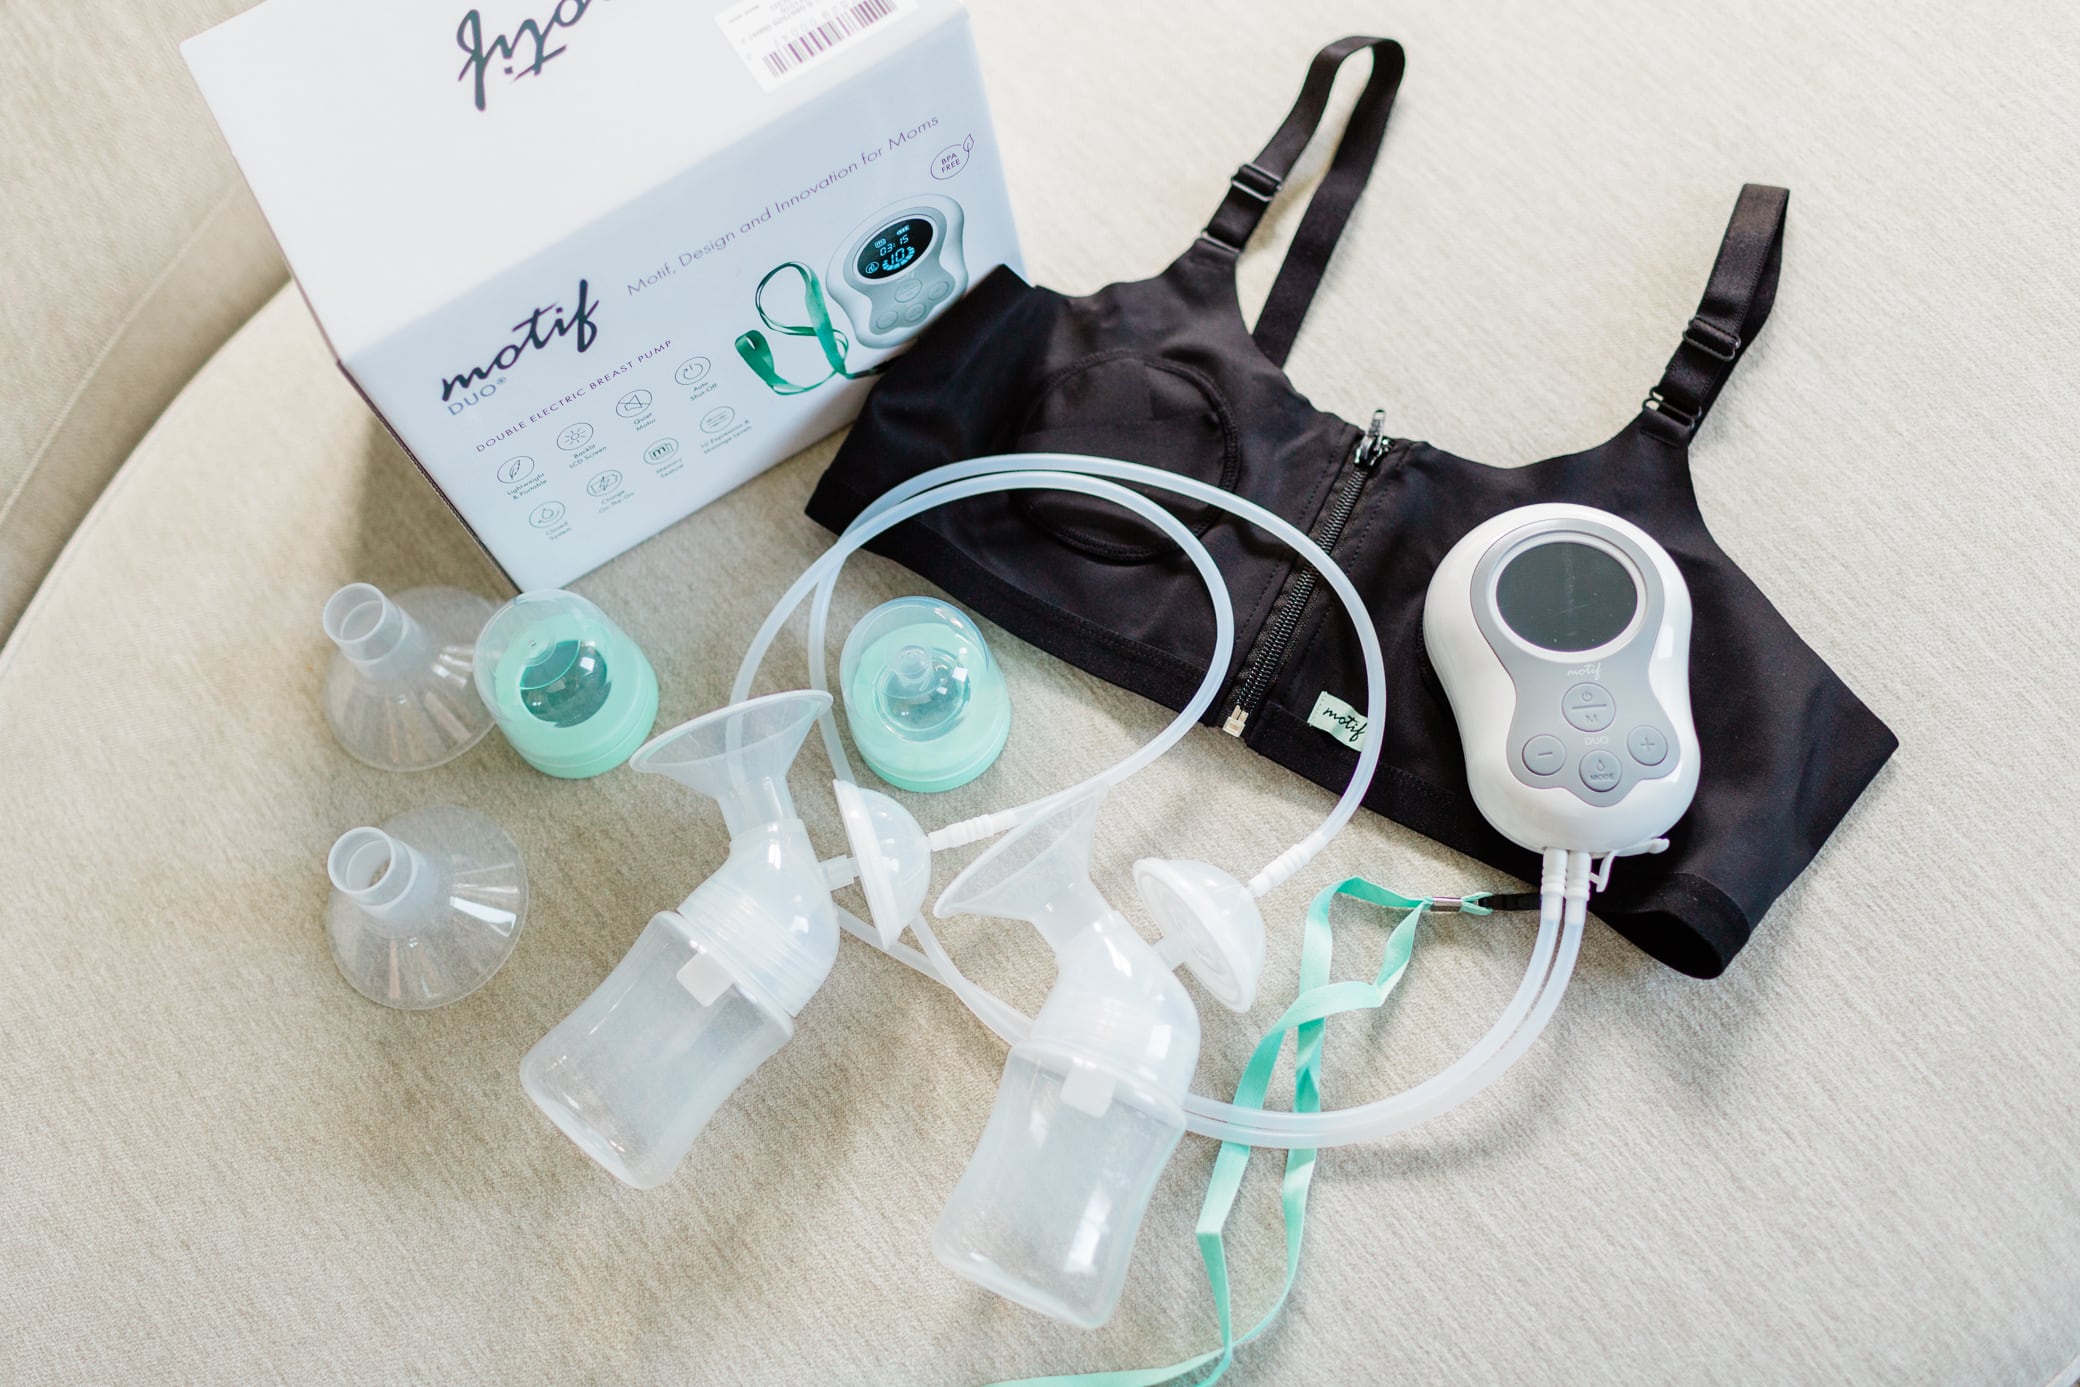 Motif duo breast pump with all of the items from the box.